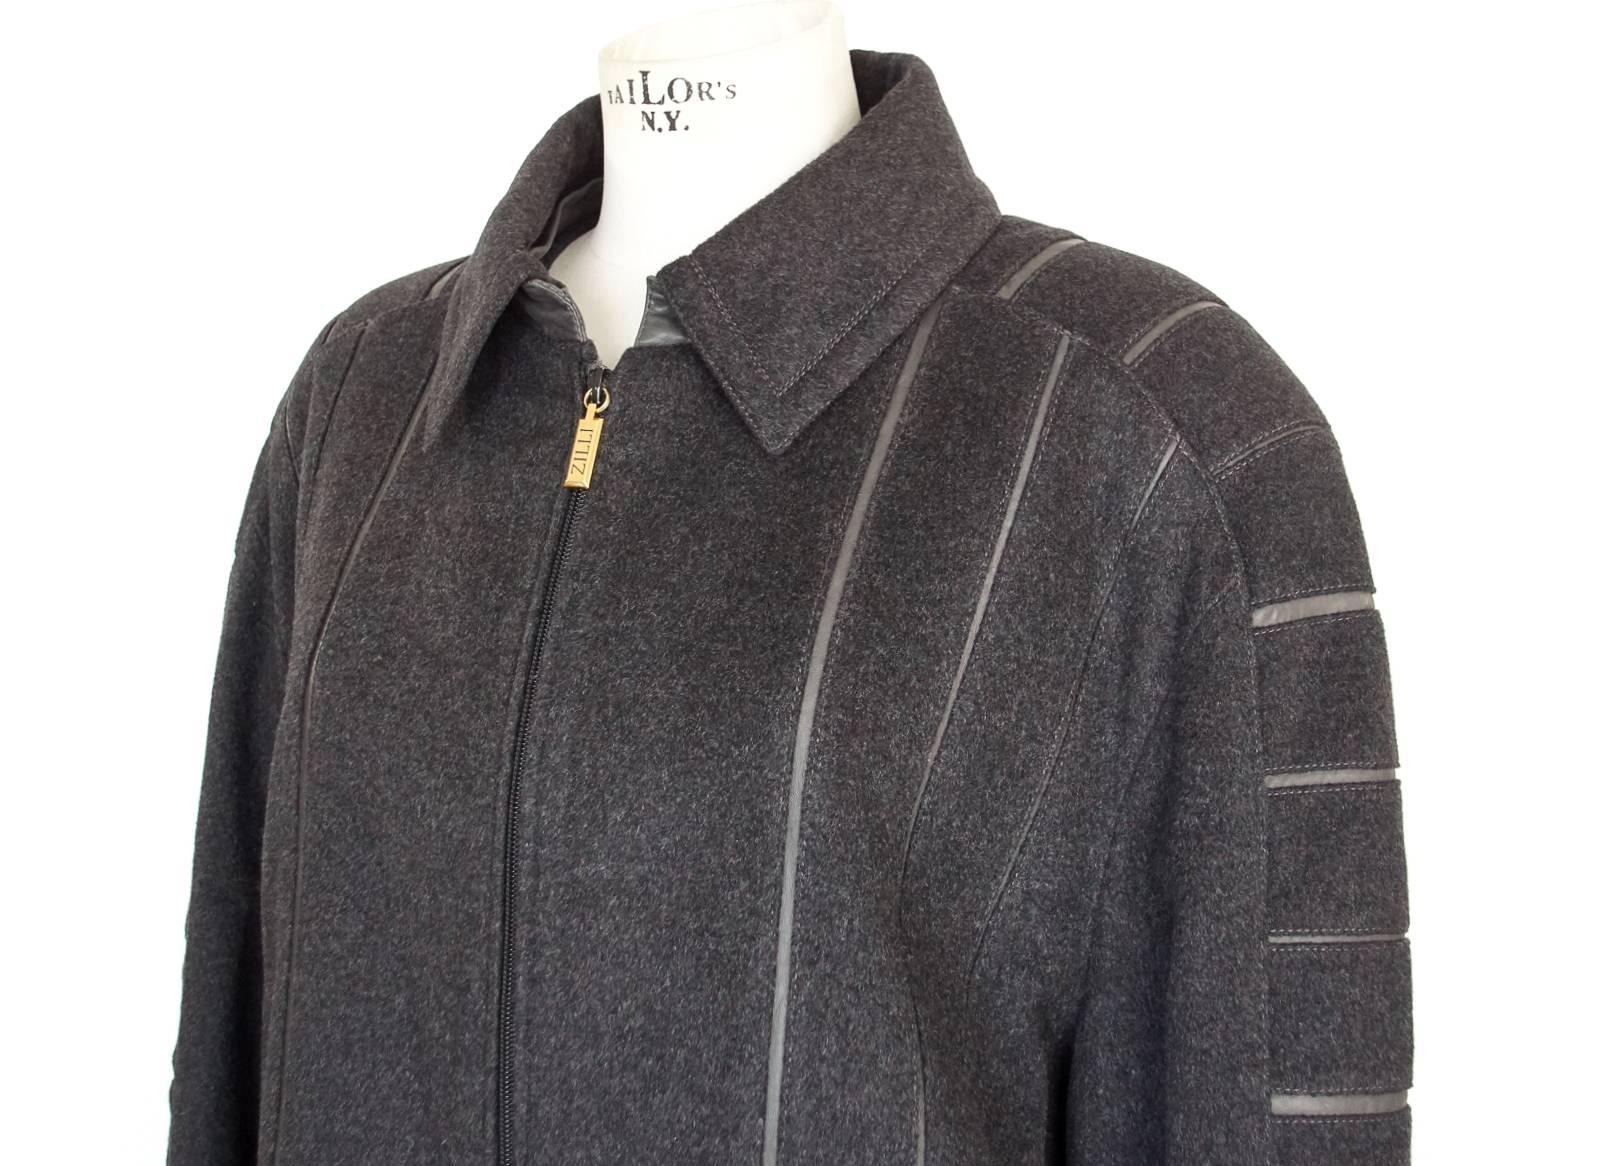 Guaranteed authentic Zilli grey cashmere modified bomber jacket. 
Remarkable workmanship and fabric quality sets this label apart.
Grey leather inset strips highlight the extraordinary workmanship of this piece.
Signature detachable collar reveals